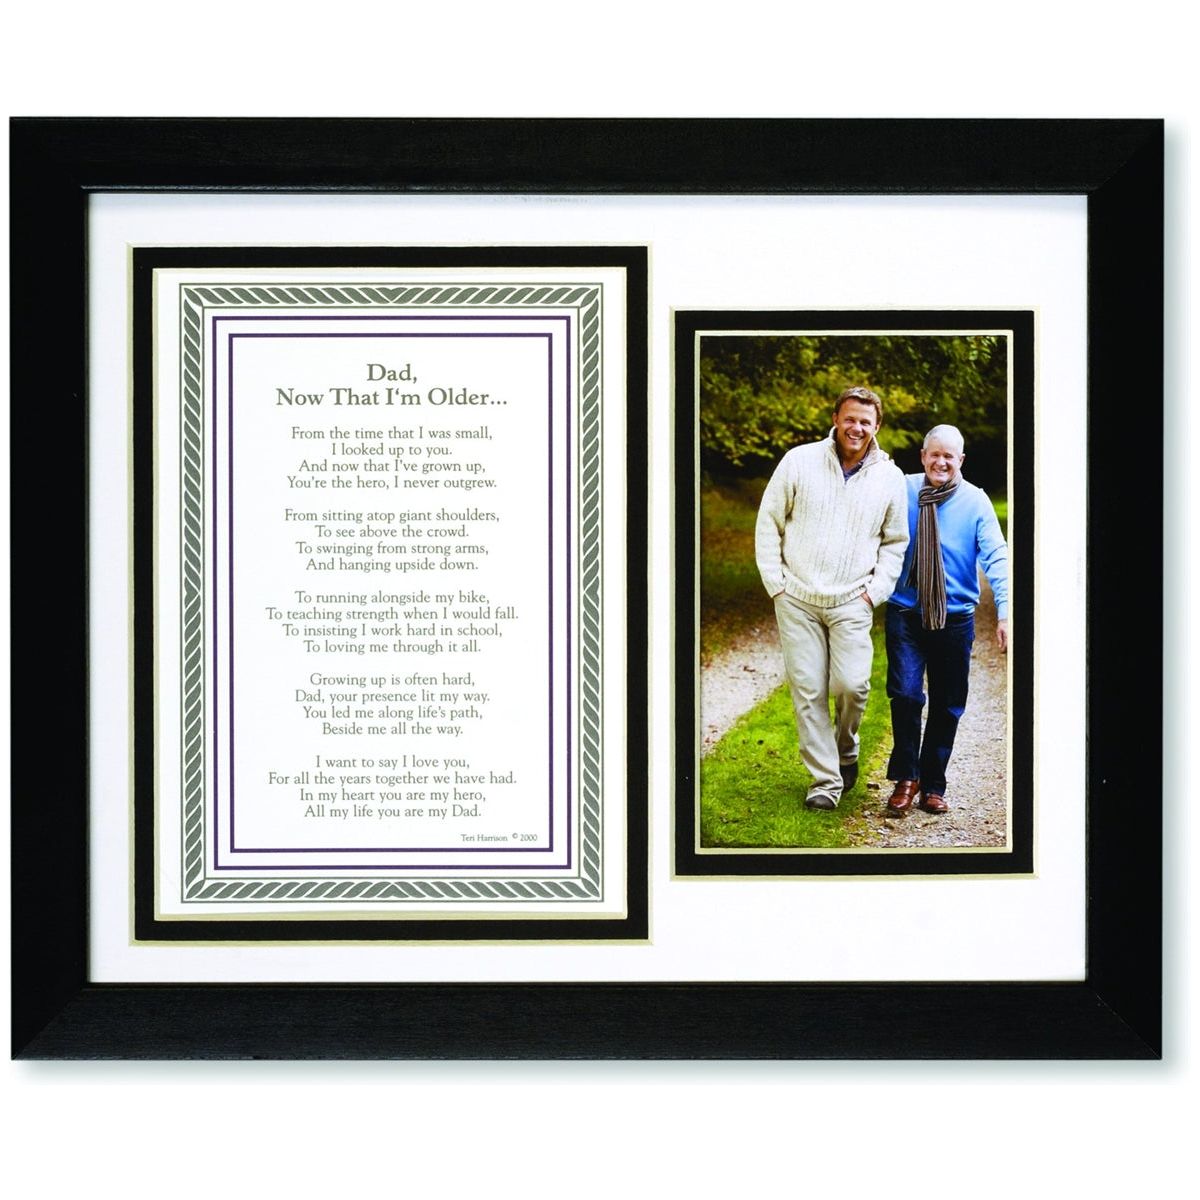 Gift for Dad: 8x10 black frame with white and black double mat, includes &quot;Dad, Now That I&#39;m Older&quot; poem and space for photo.